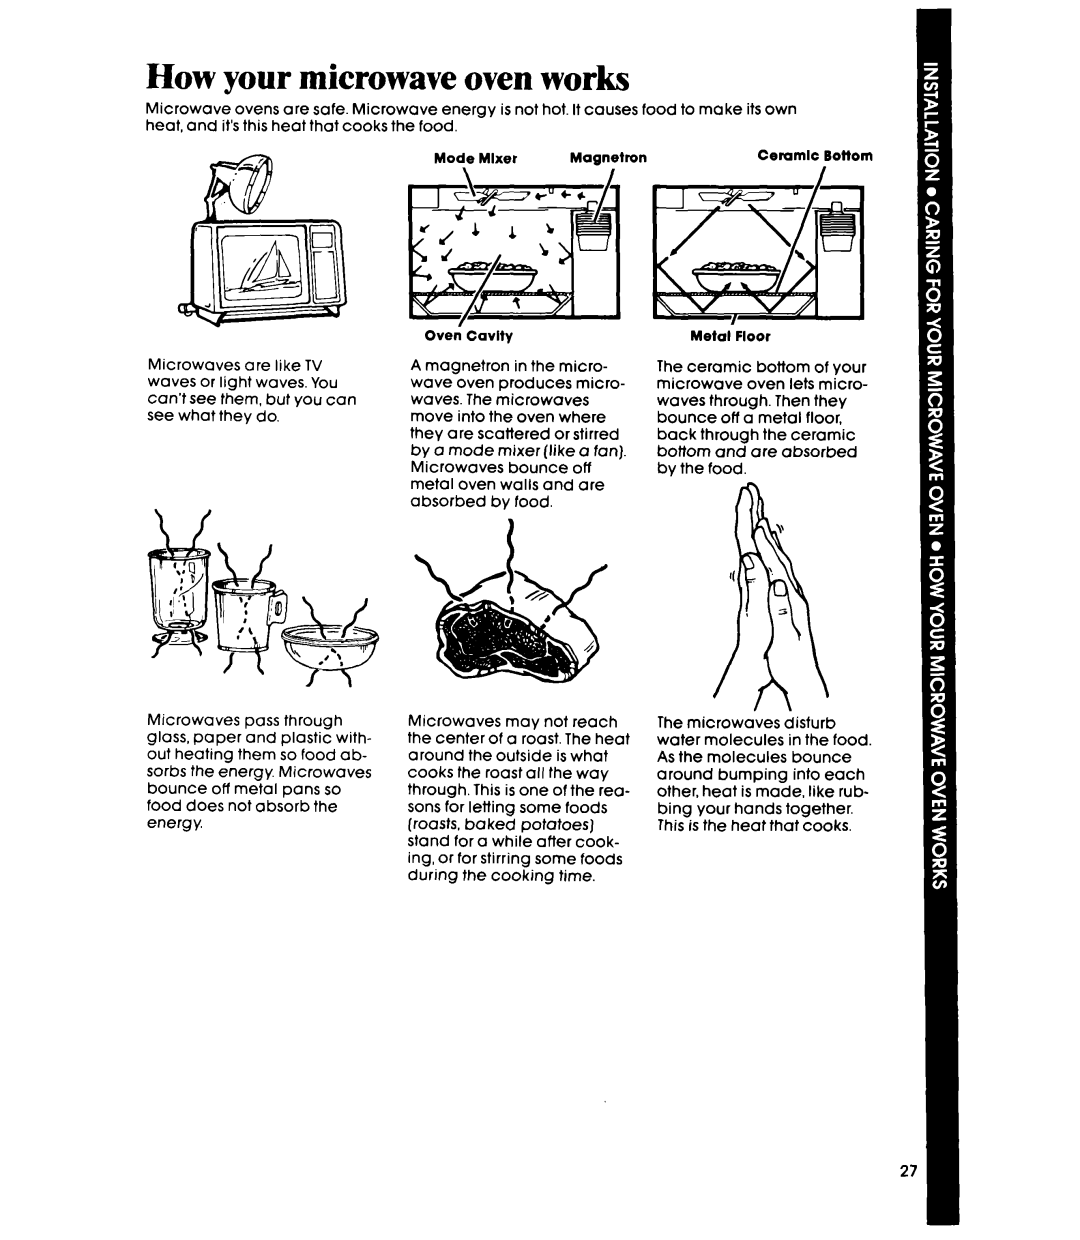 Whirlpool MW36OOXS manual How your microwave oven works 